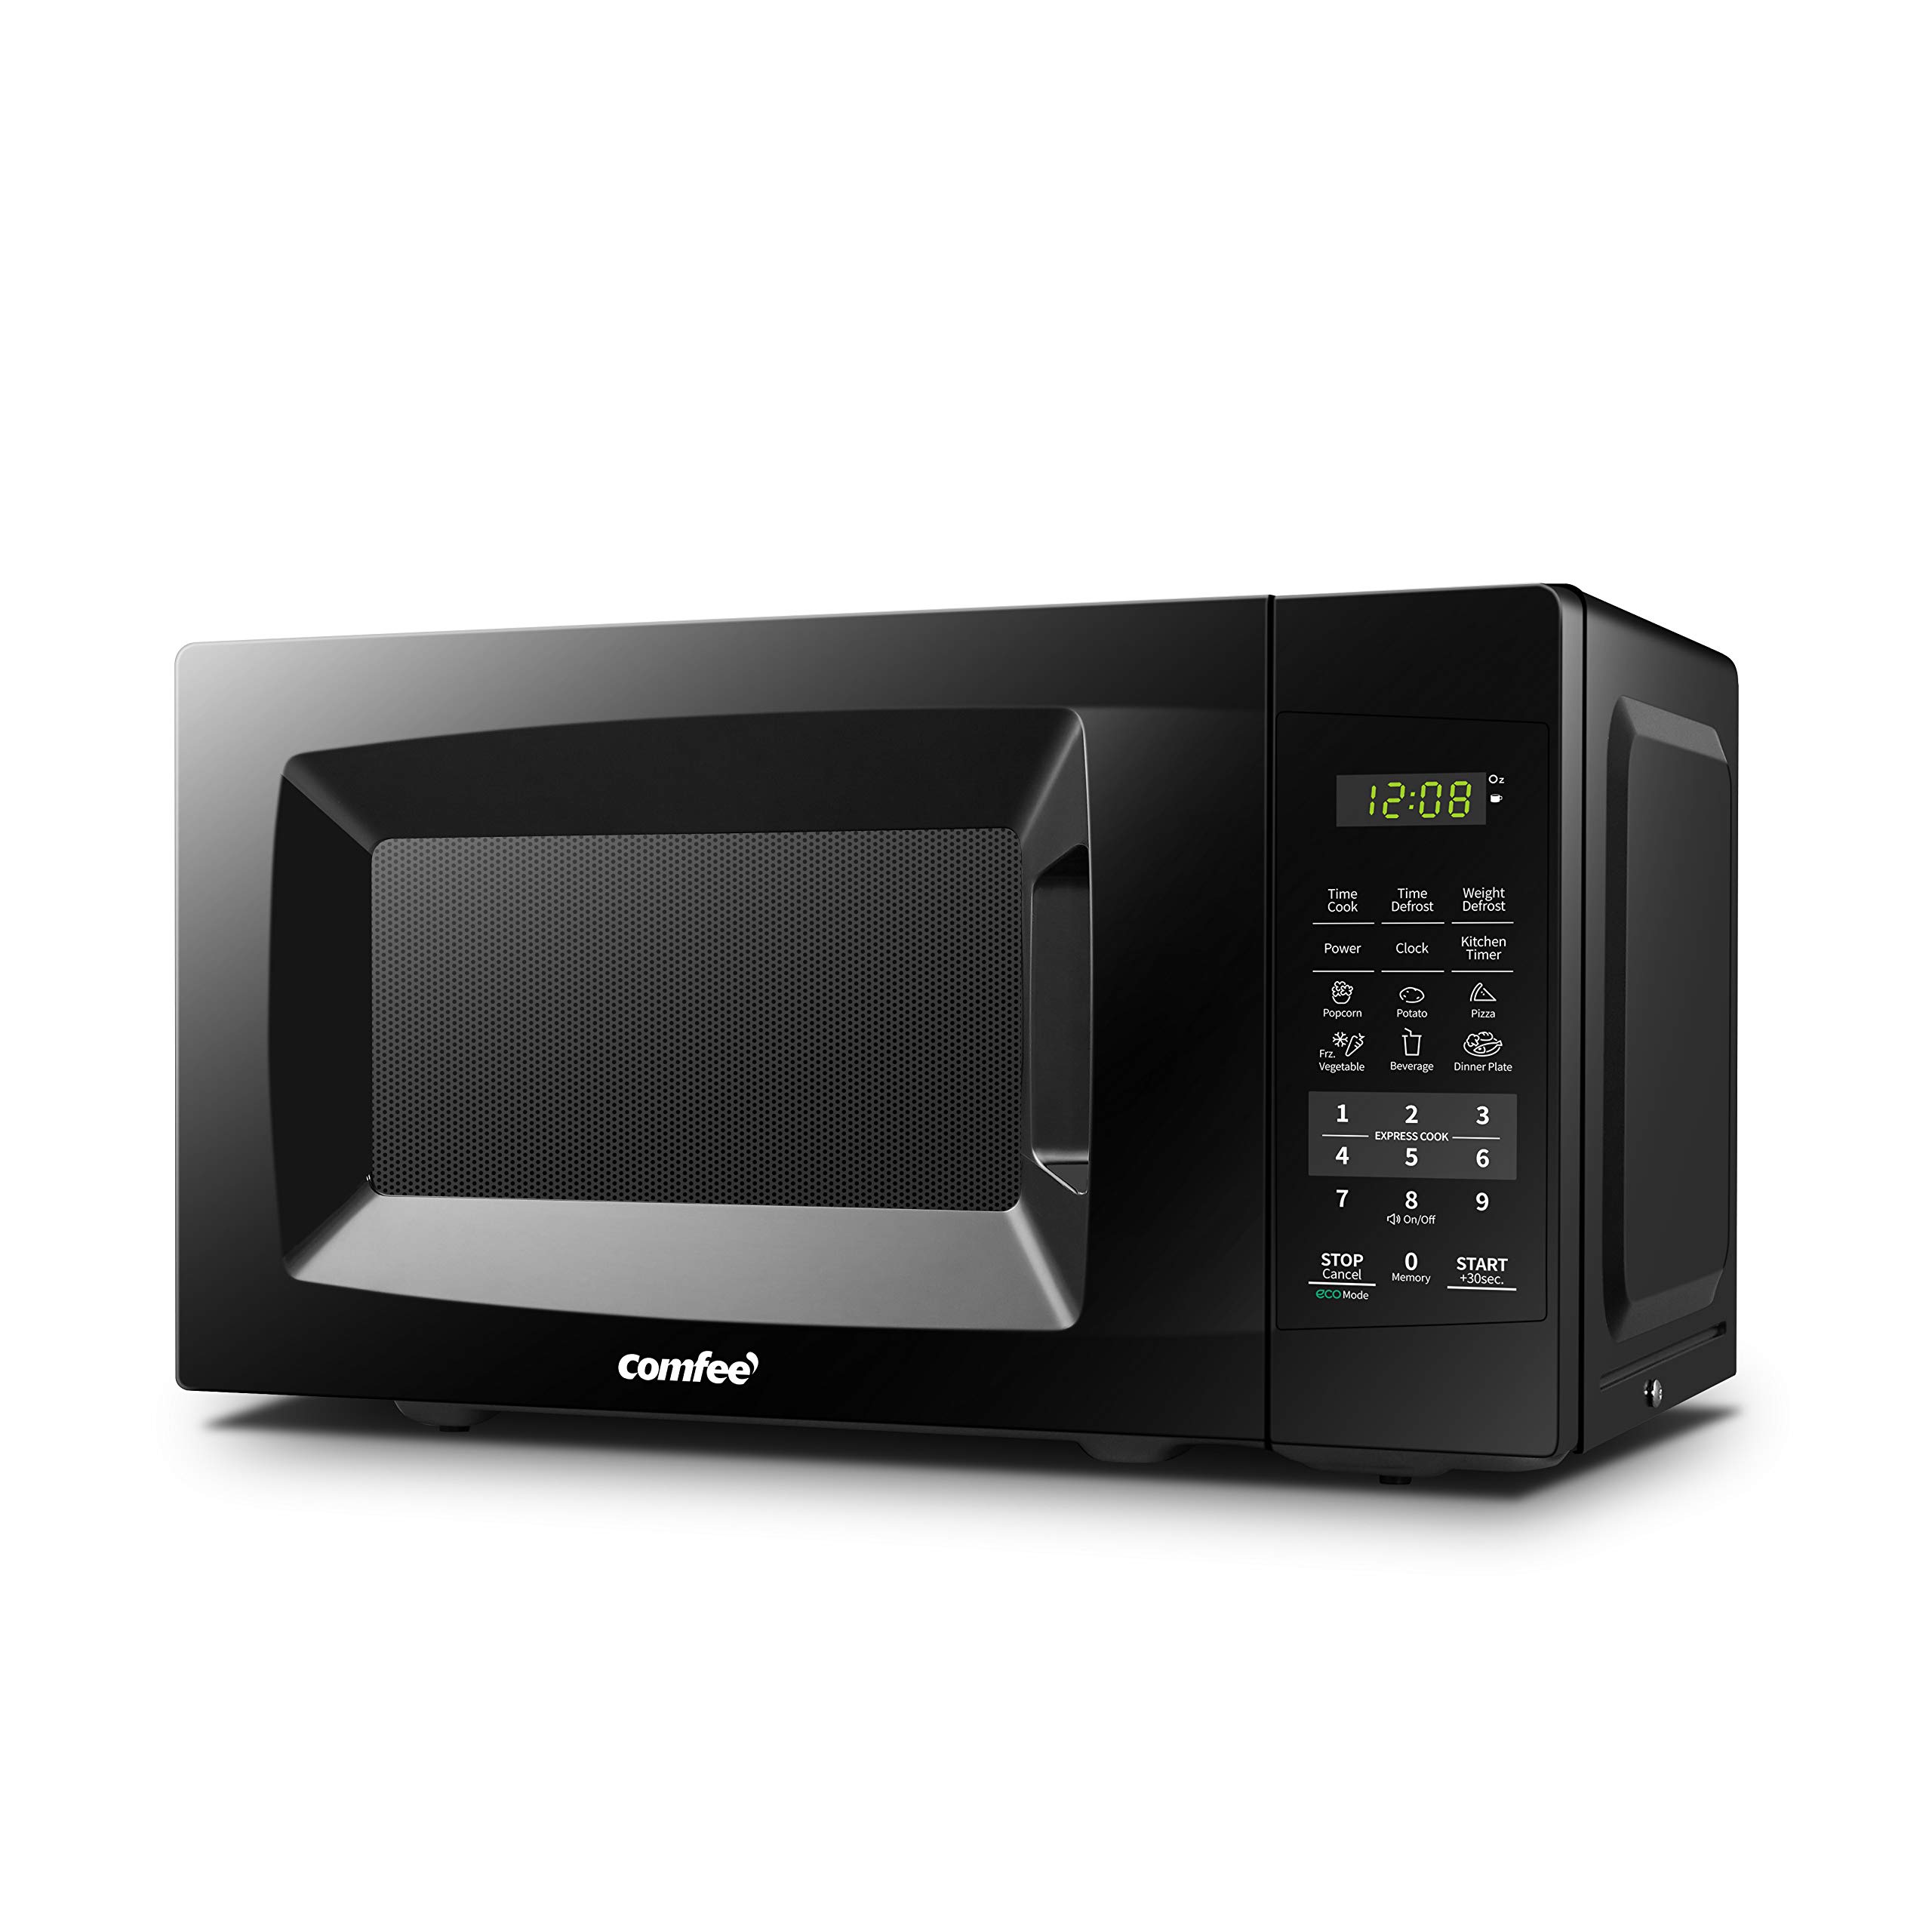 COMFEE' EM720CPL-PMB Countertop Microwave Oven, 0.7cu.ft, 700W, Black & Mini Countertop Toaster Oven, 2-Knobs Easy to Control with Timer-Bake-Broil-Toast Setting, 1000W, Black